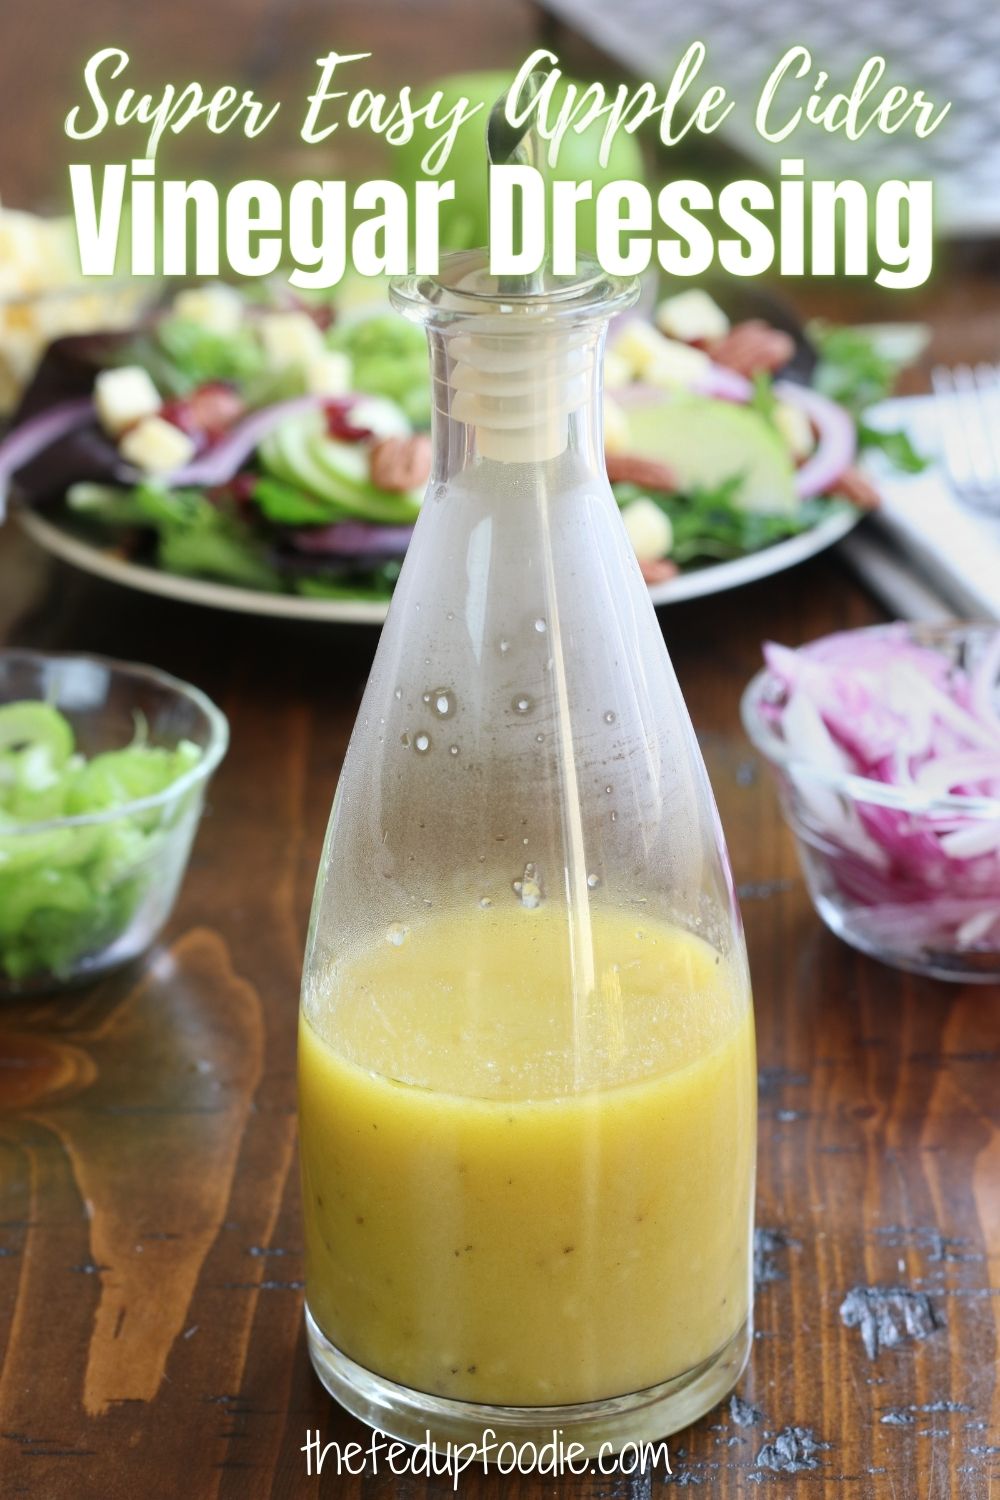 Apple Cider Vinegar Dressing is made with the simple ingredients of extra virgin olive oil, apple cider vinegar, garlic and Dijon mustard. This homemade dressing is a great way to enjoy fall salads and vegetables.
#AppleCiderVinegarDressing #AppleCiderVinaigrette #AppleCiderVinaigretteDressingRecipe #AppleCiderVinegretteRecipe #SimpleVinaigretteDressing #AppleCiderVinegaretteDressing #AppleCiderVinegarDressingVinaigrette 